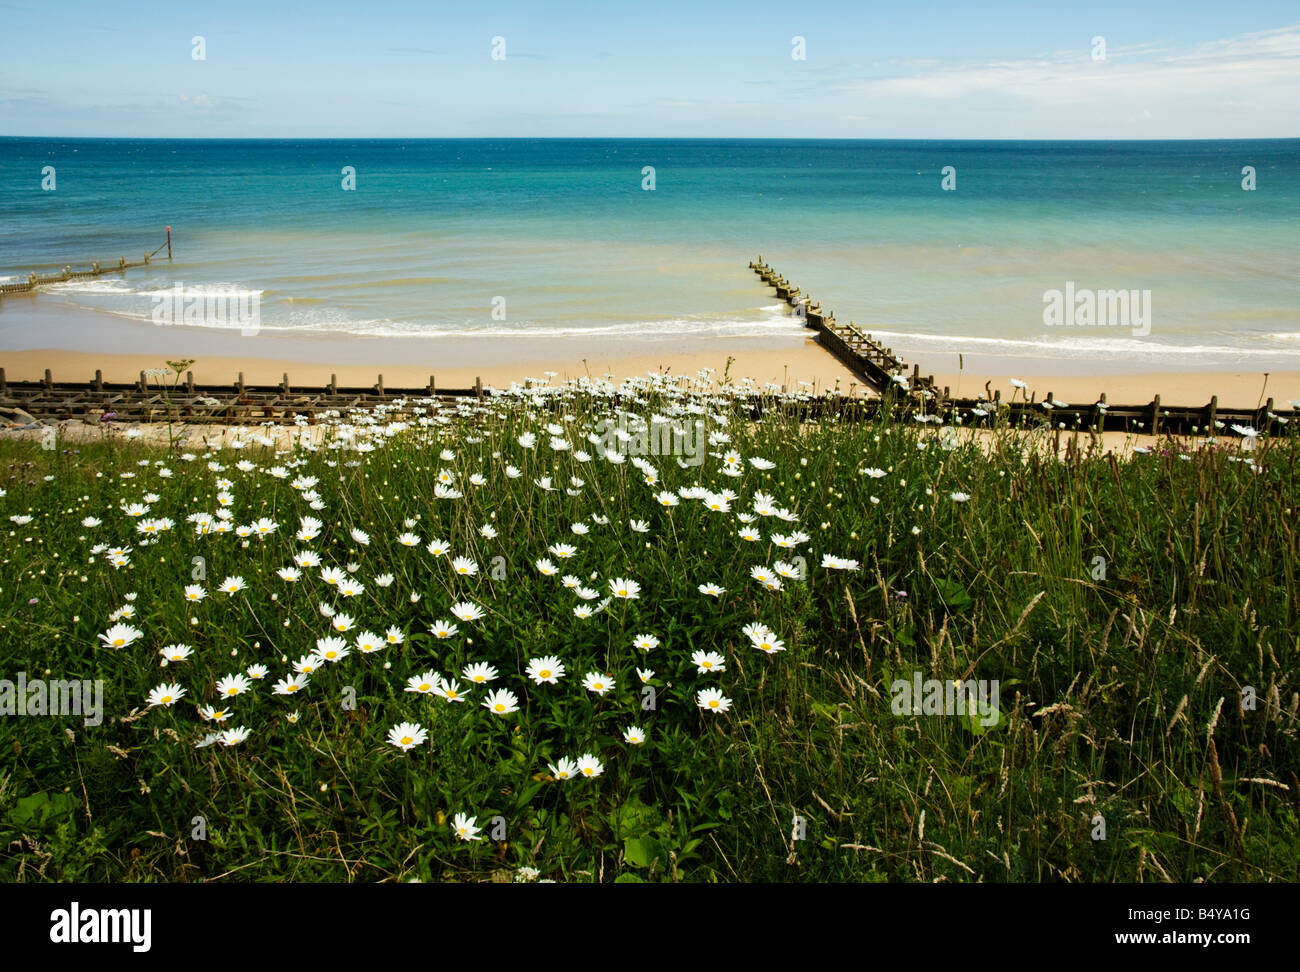 Daisies growing on cliffs above Overstrand beach Stock Photo